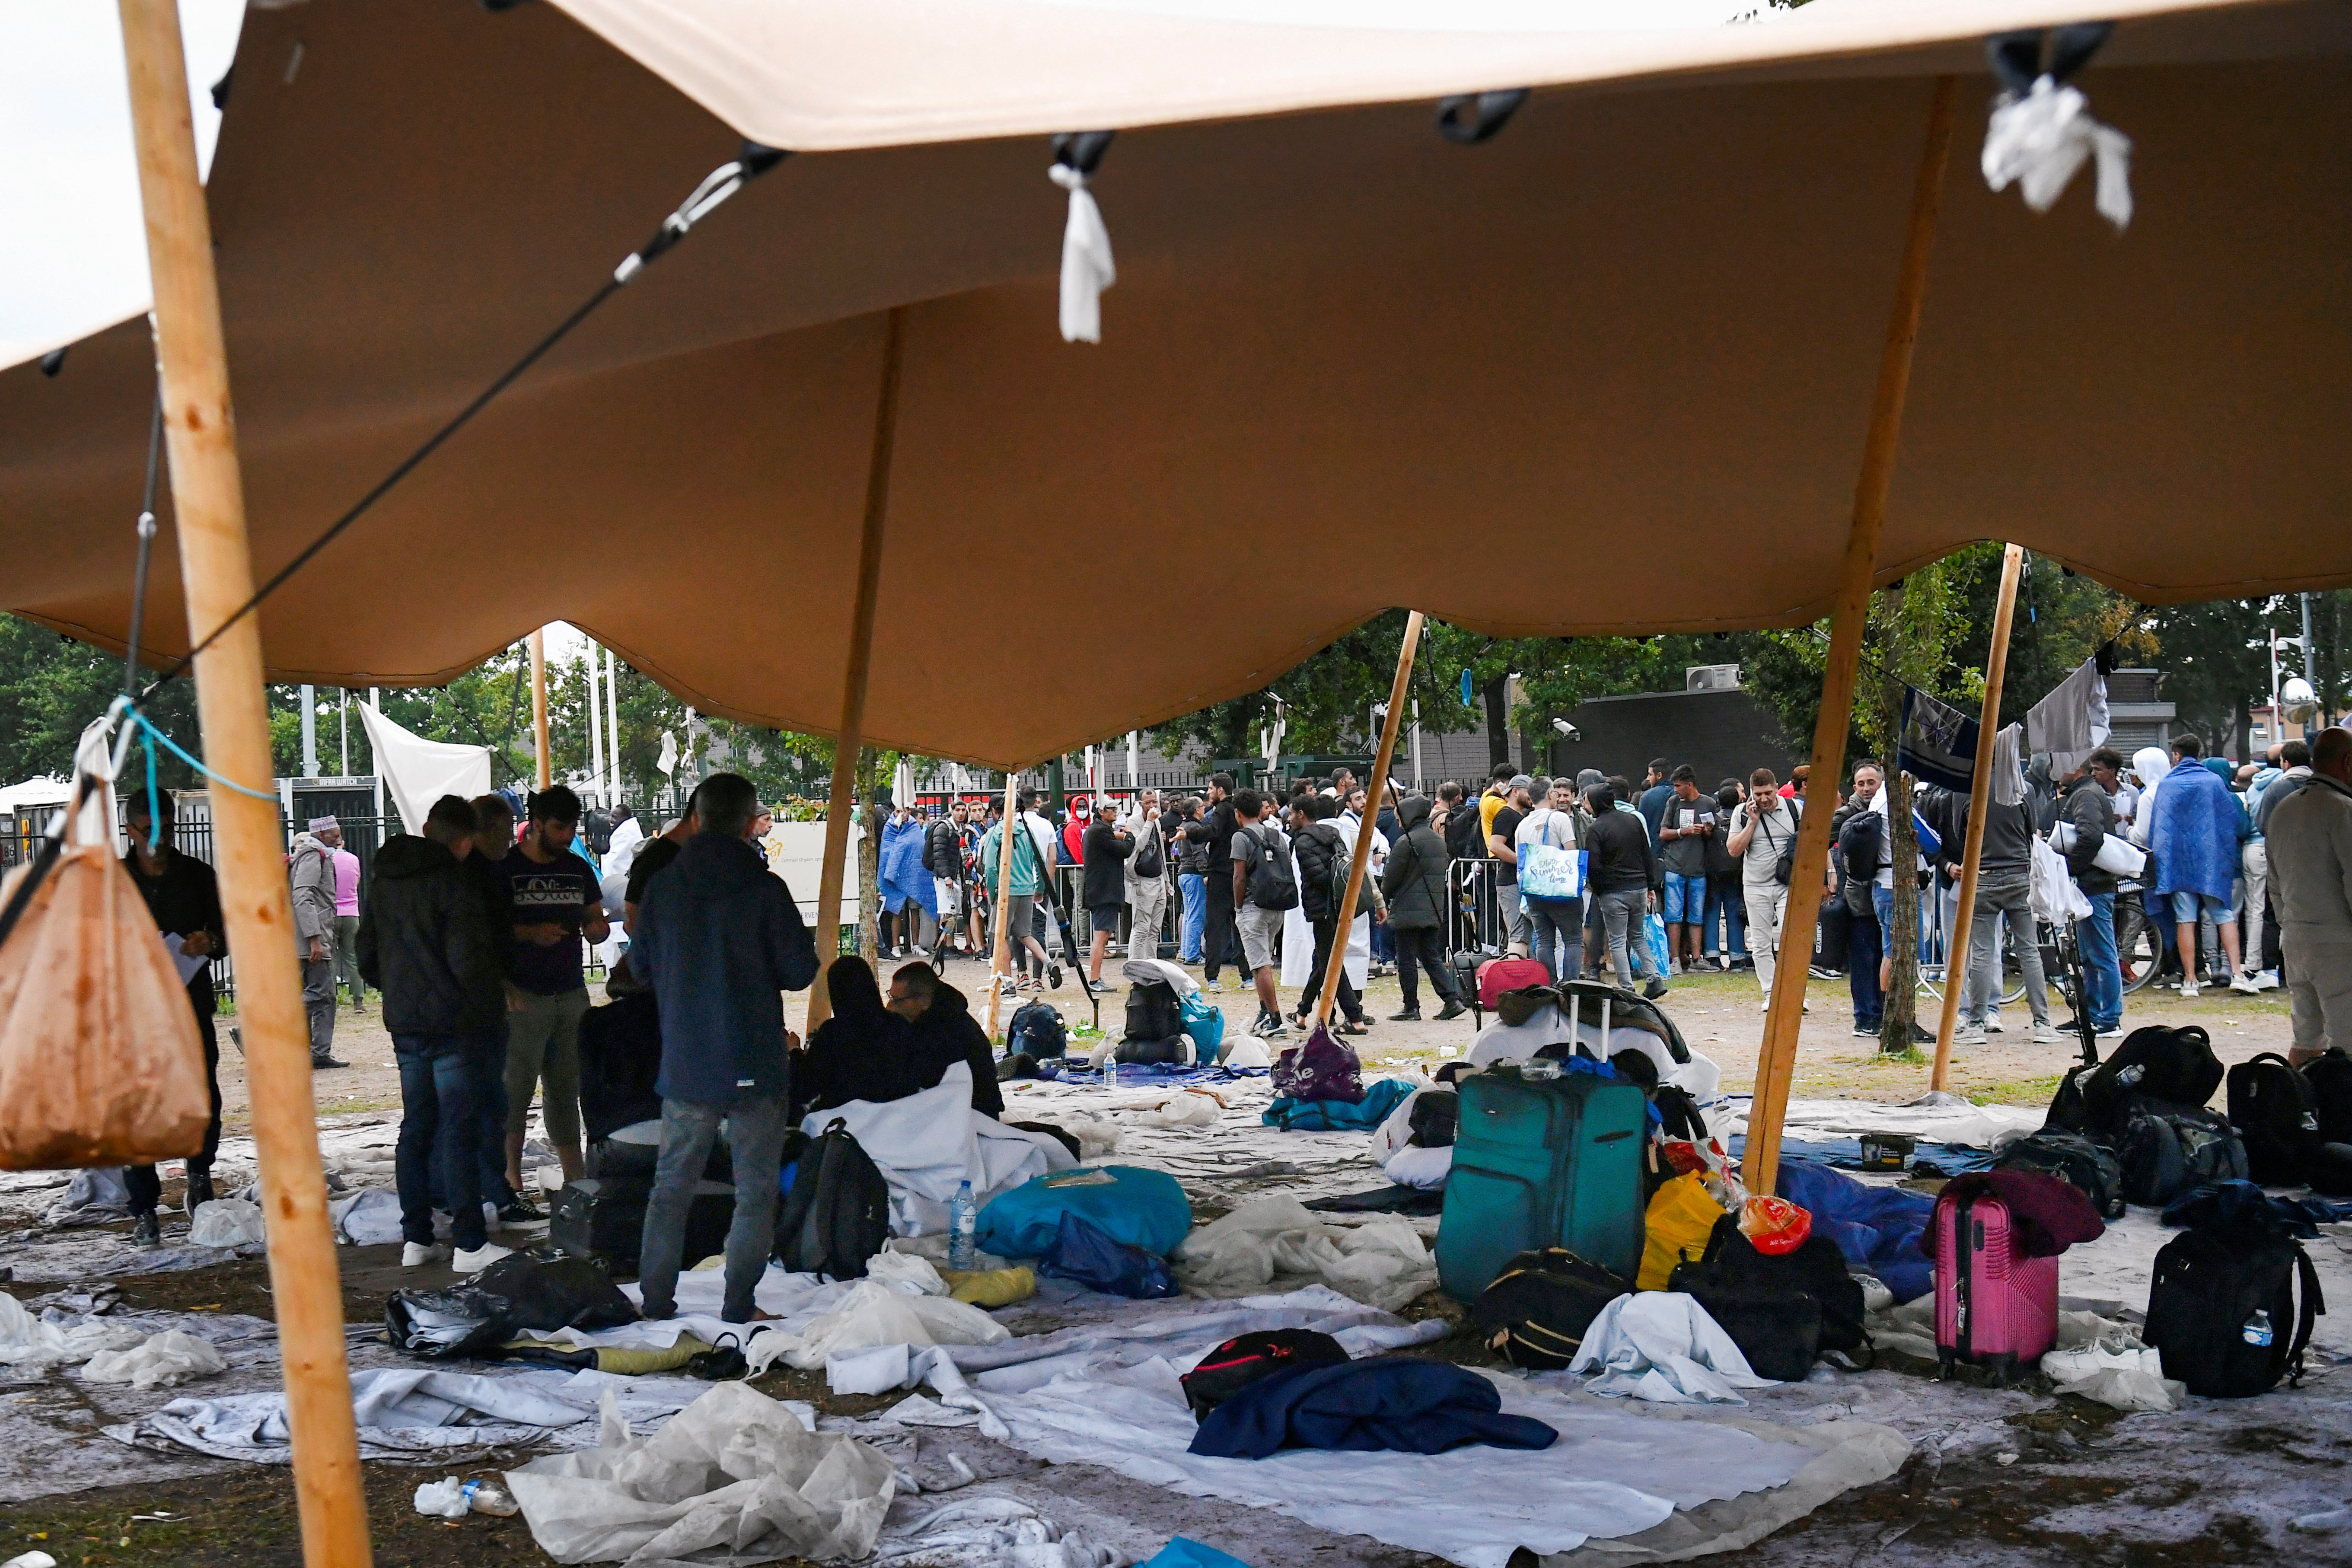 Refugees wait outdoors on the damp ground at the main reception centre for asylum seekers, in Ter Apel